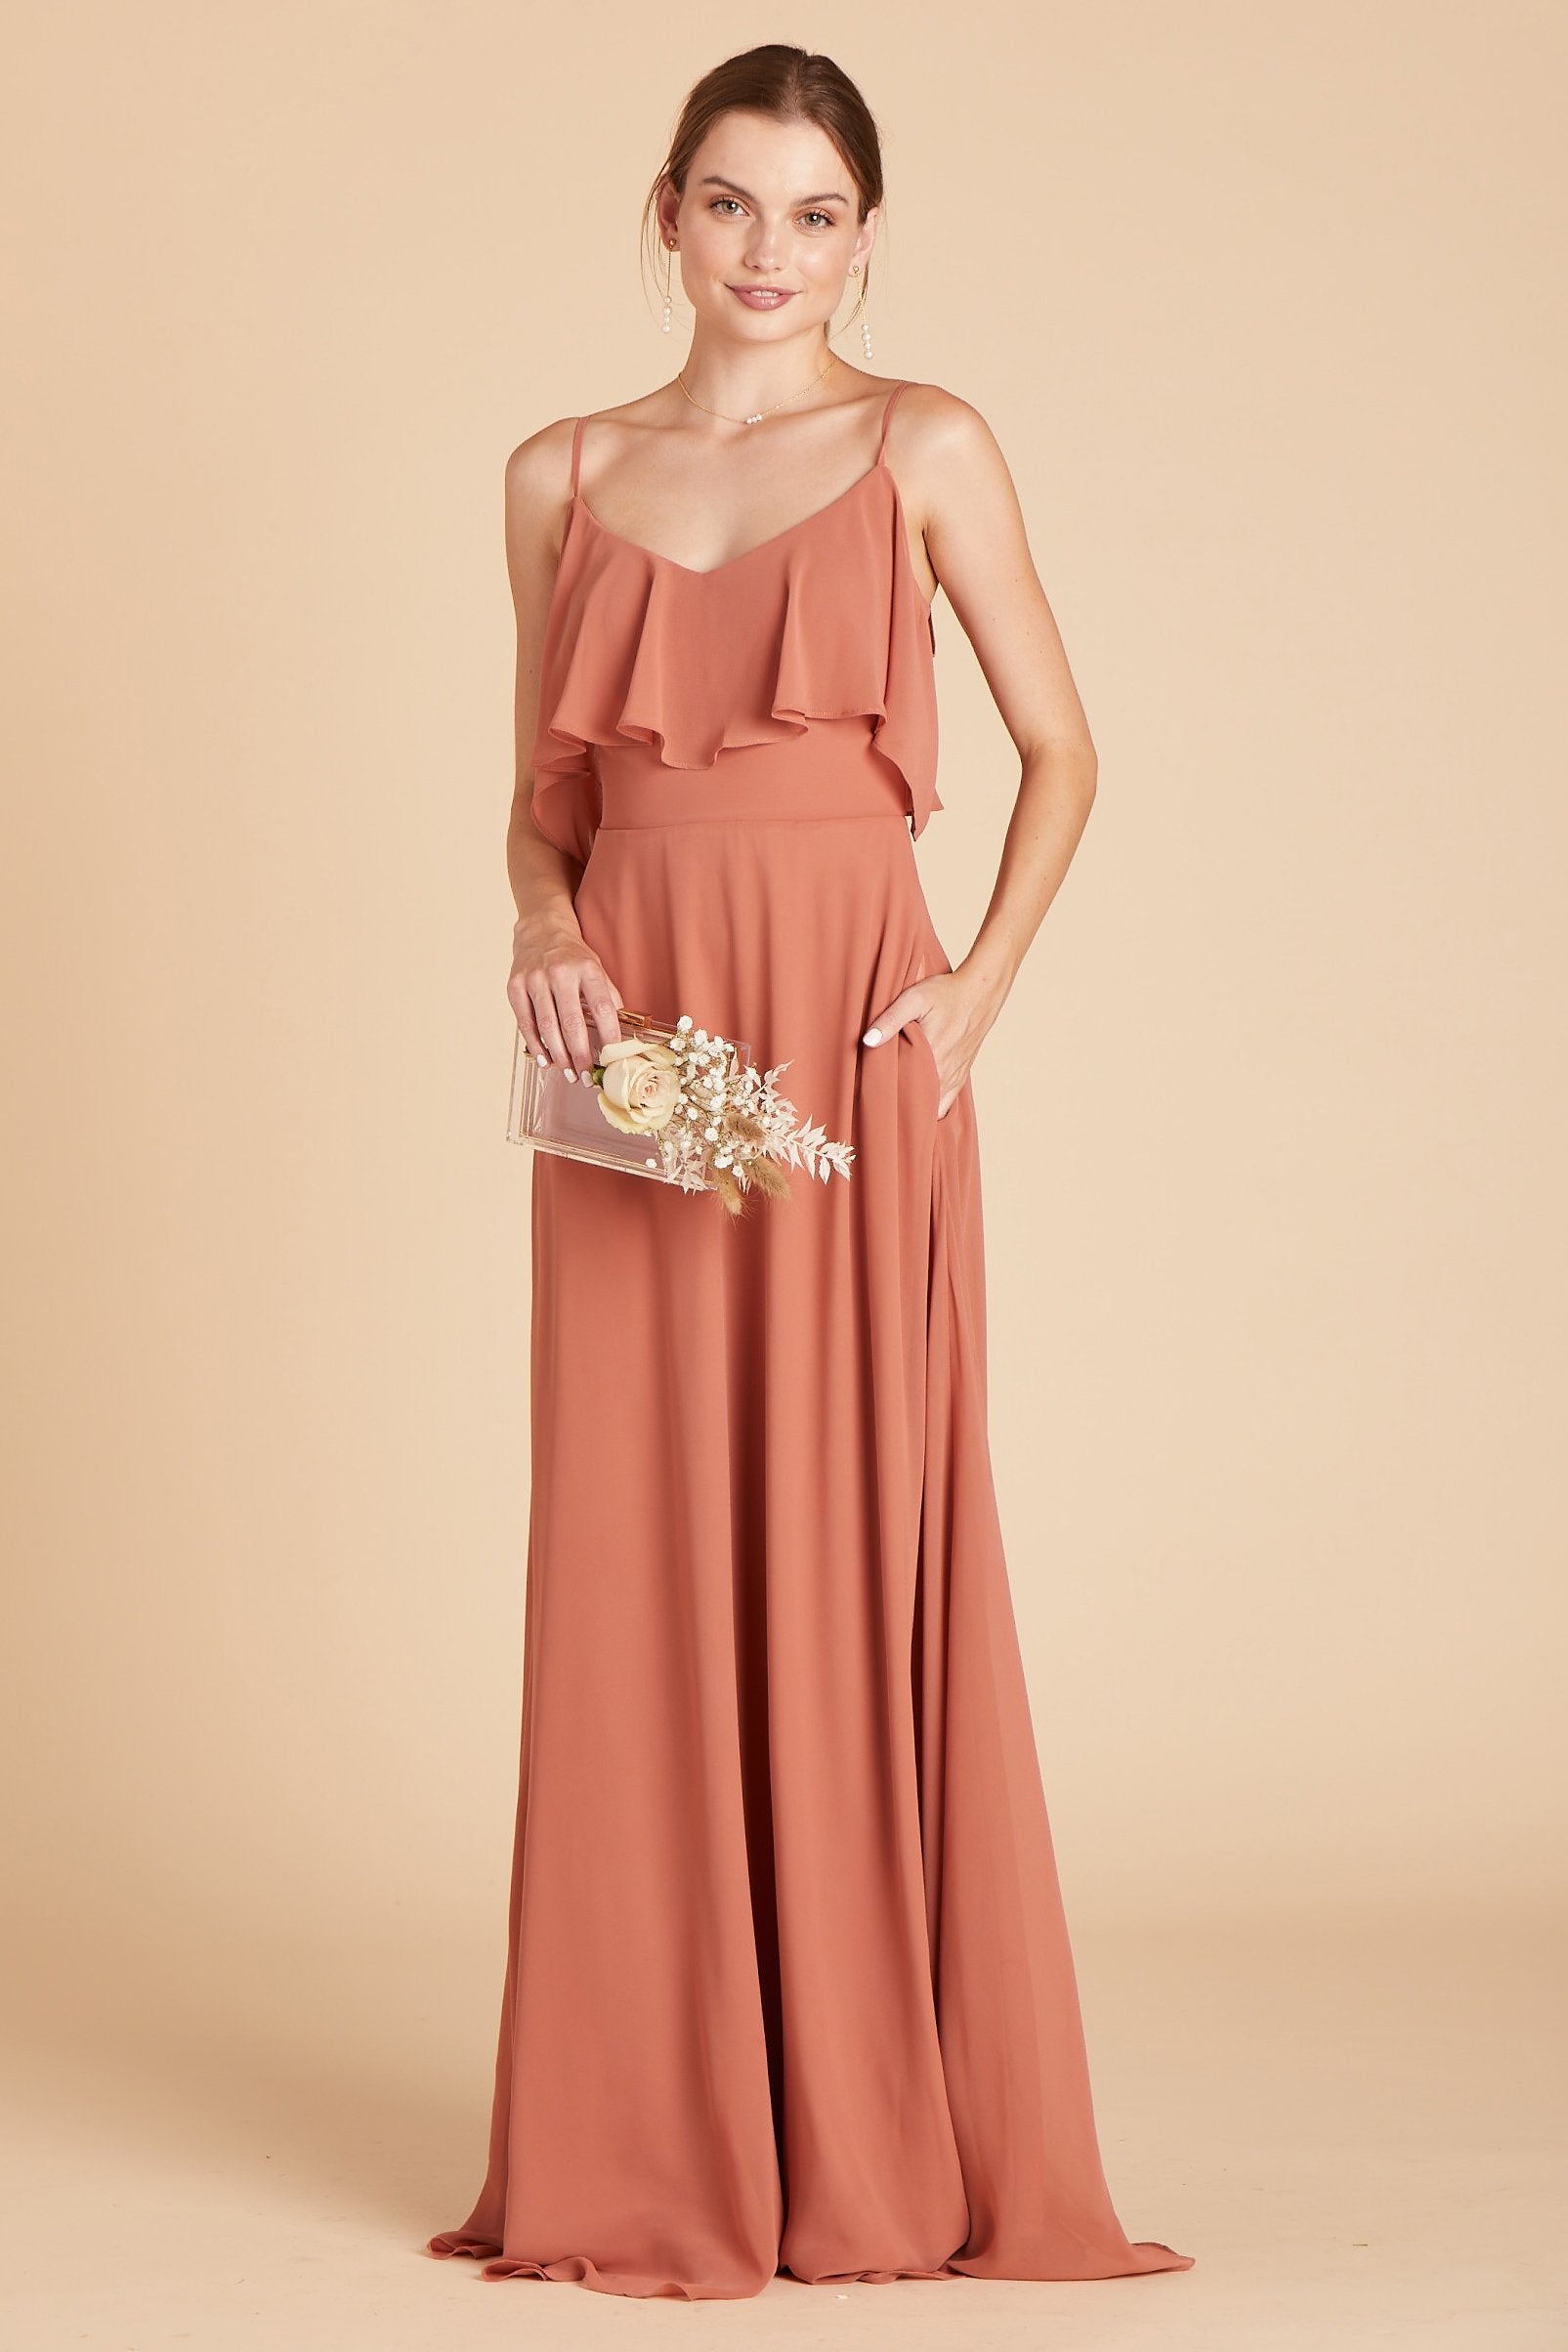 Jane convertible bridesmaid dress in terracotta orange chiffon by Birdy Grey, front view with hand in pocket